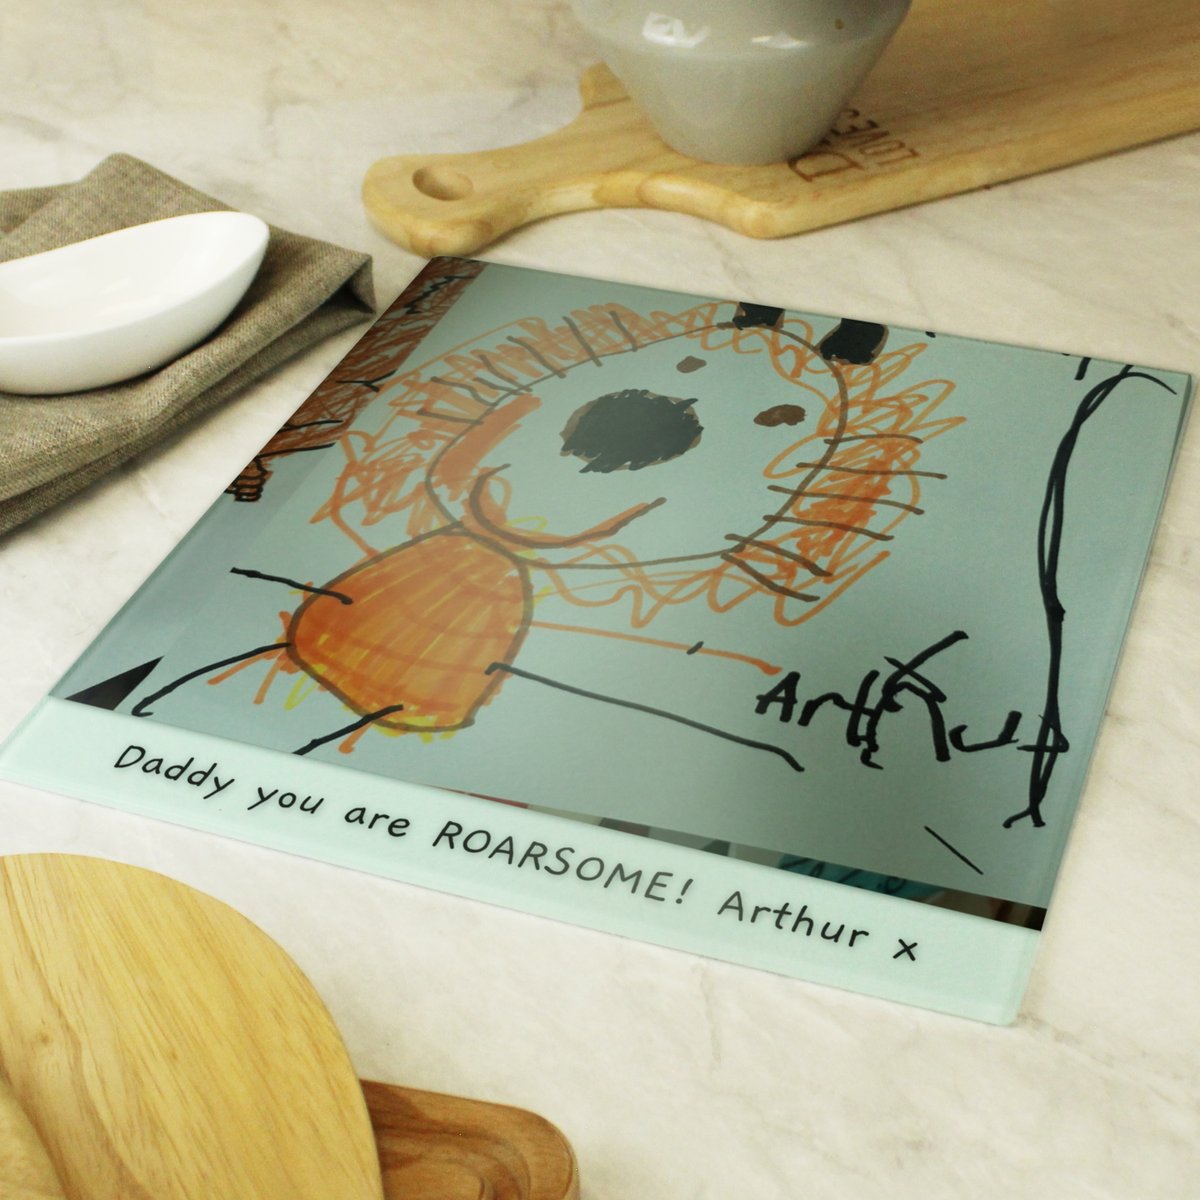 A lovely way to treasure a child's drawing, have it printed, along with any message, on to this glass chopping board making it a great gift idea for any cook in the family lilybluestore.com/products/perso… #giftideas #childsdrawing #ukgifthour #fathersday #personalised #mhhsbd #earlybiz